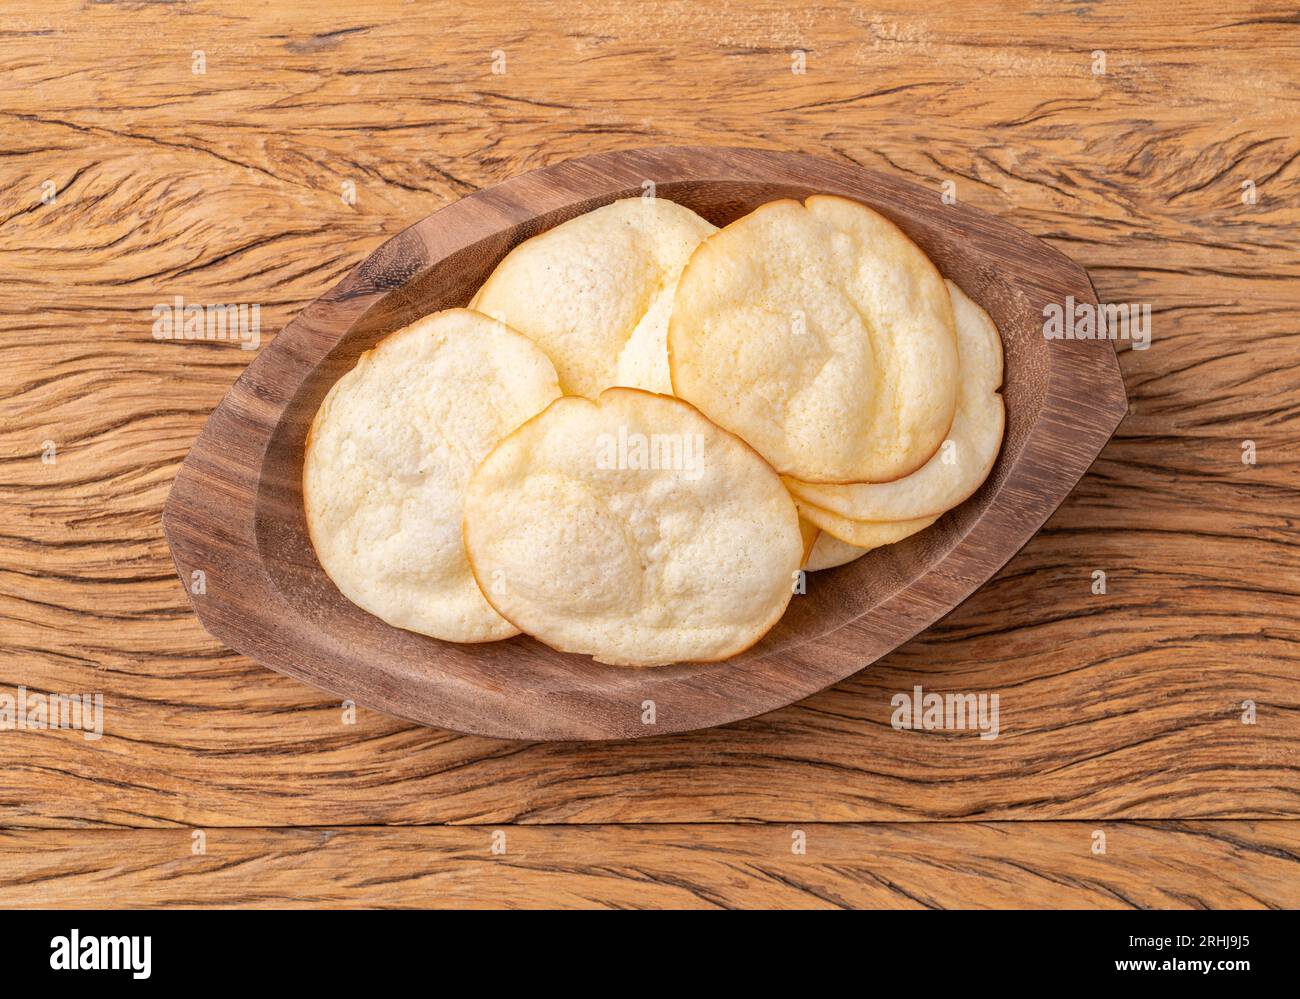 Smoked provolone cheese chips in a bowl over wooden table. Stock Photo